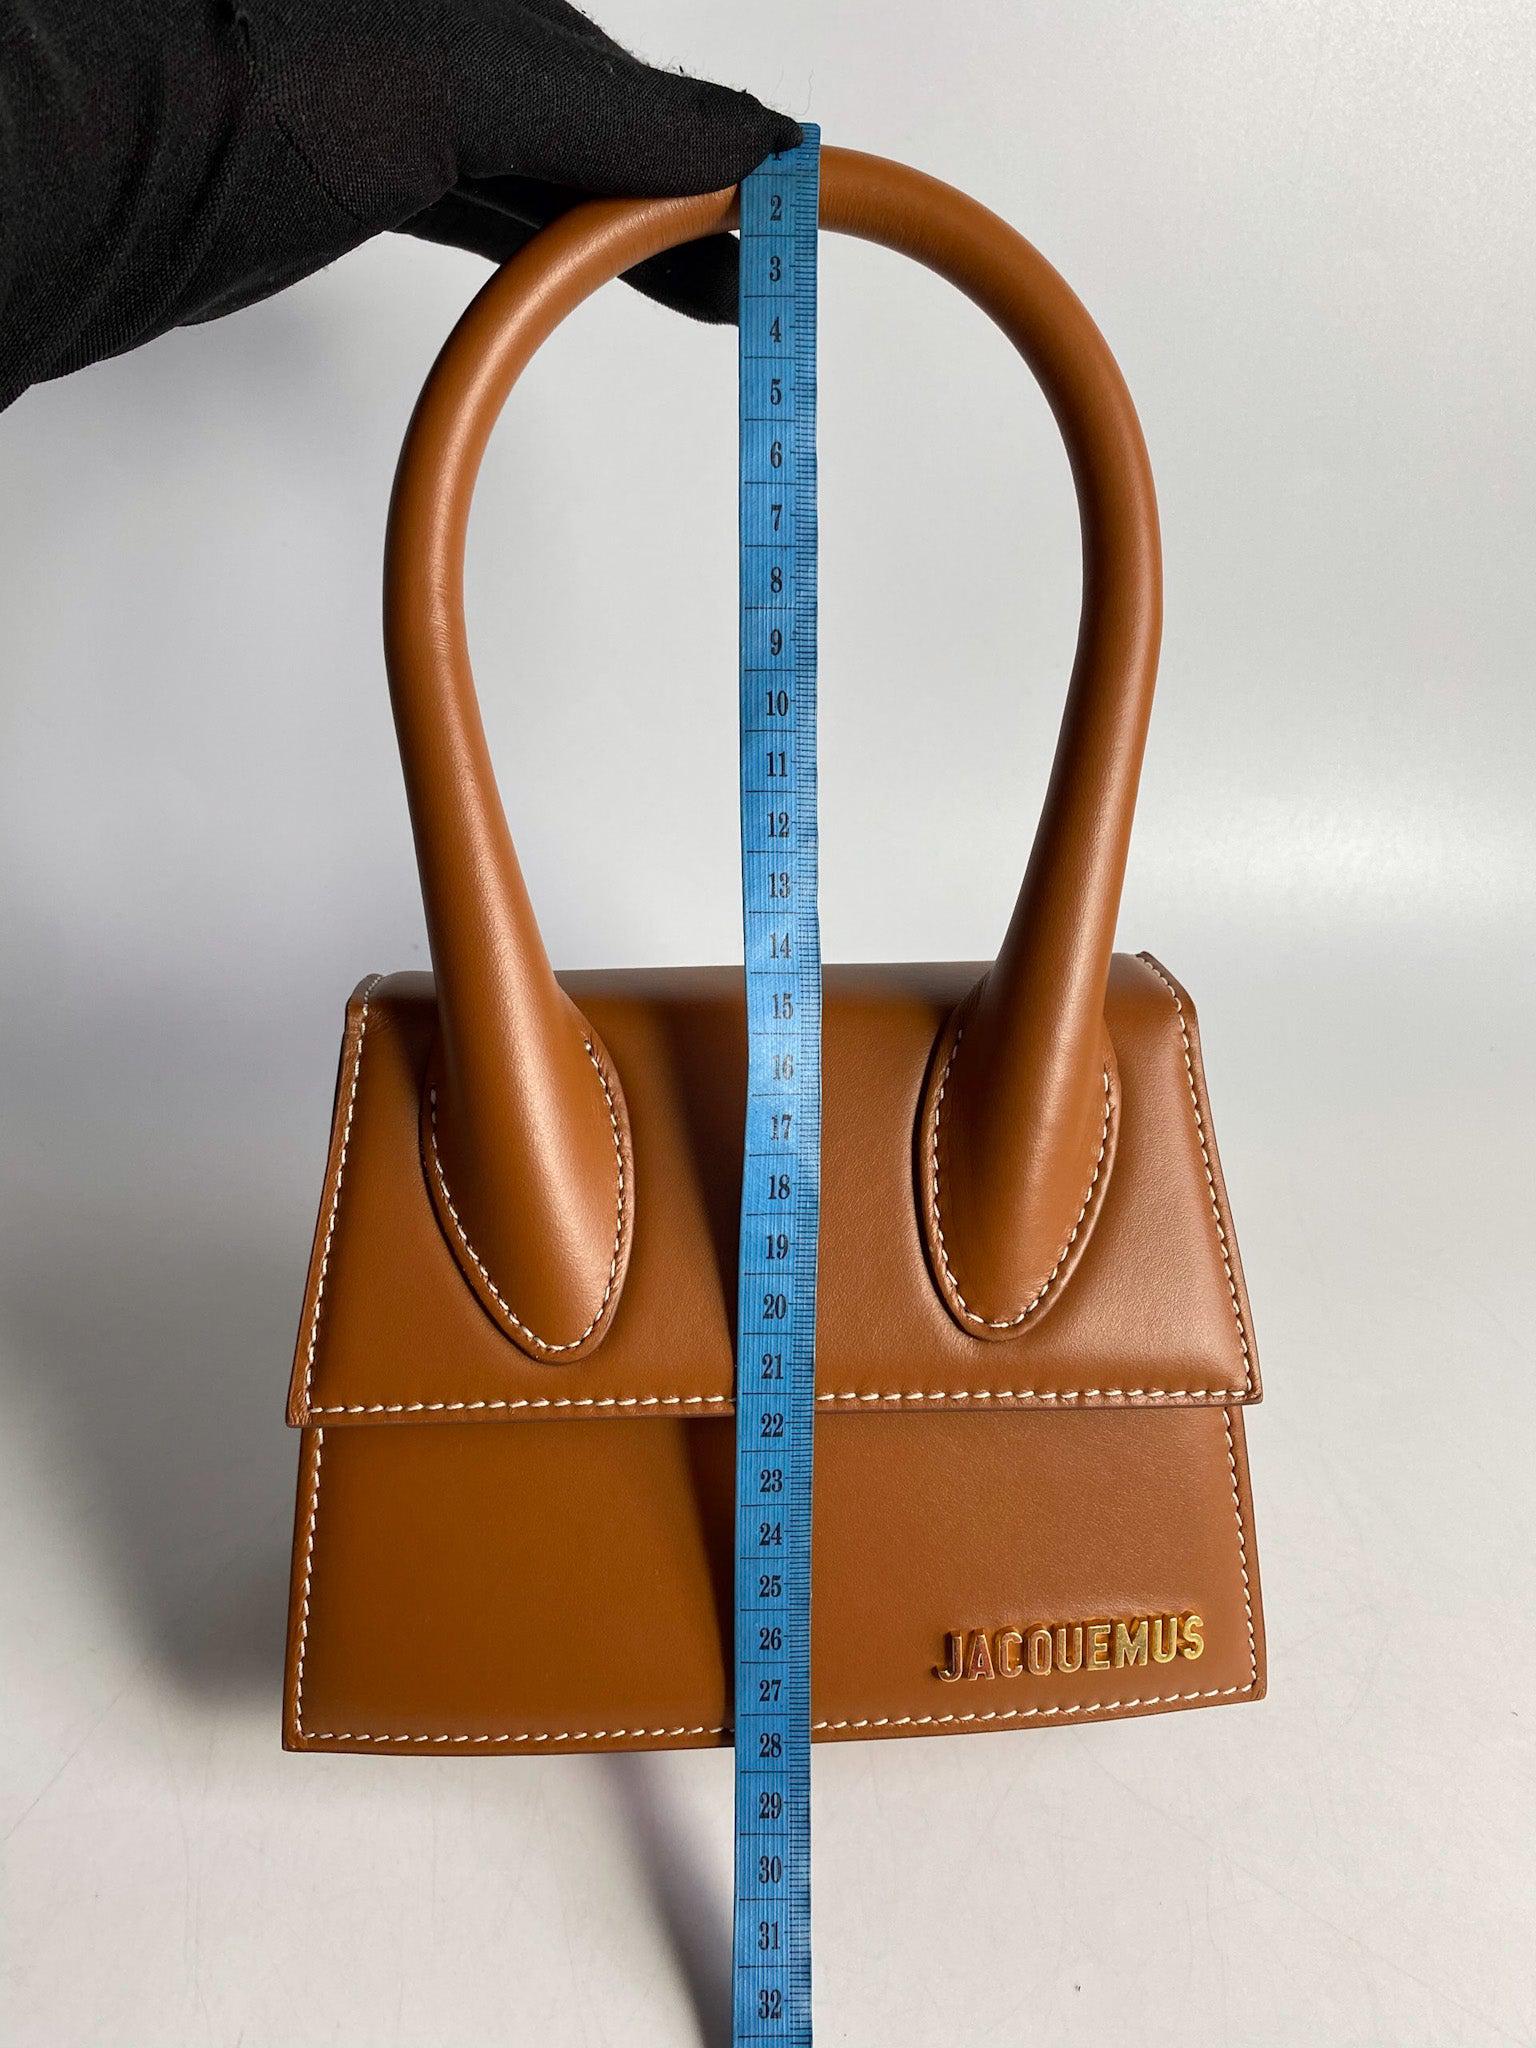 Jacquemus Le Chiquito Moyen Y Brown Bag in Gold Hardware